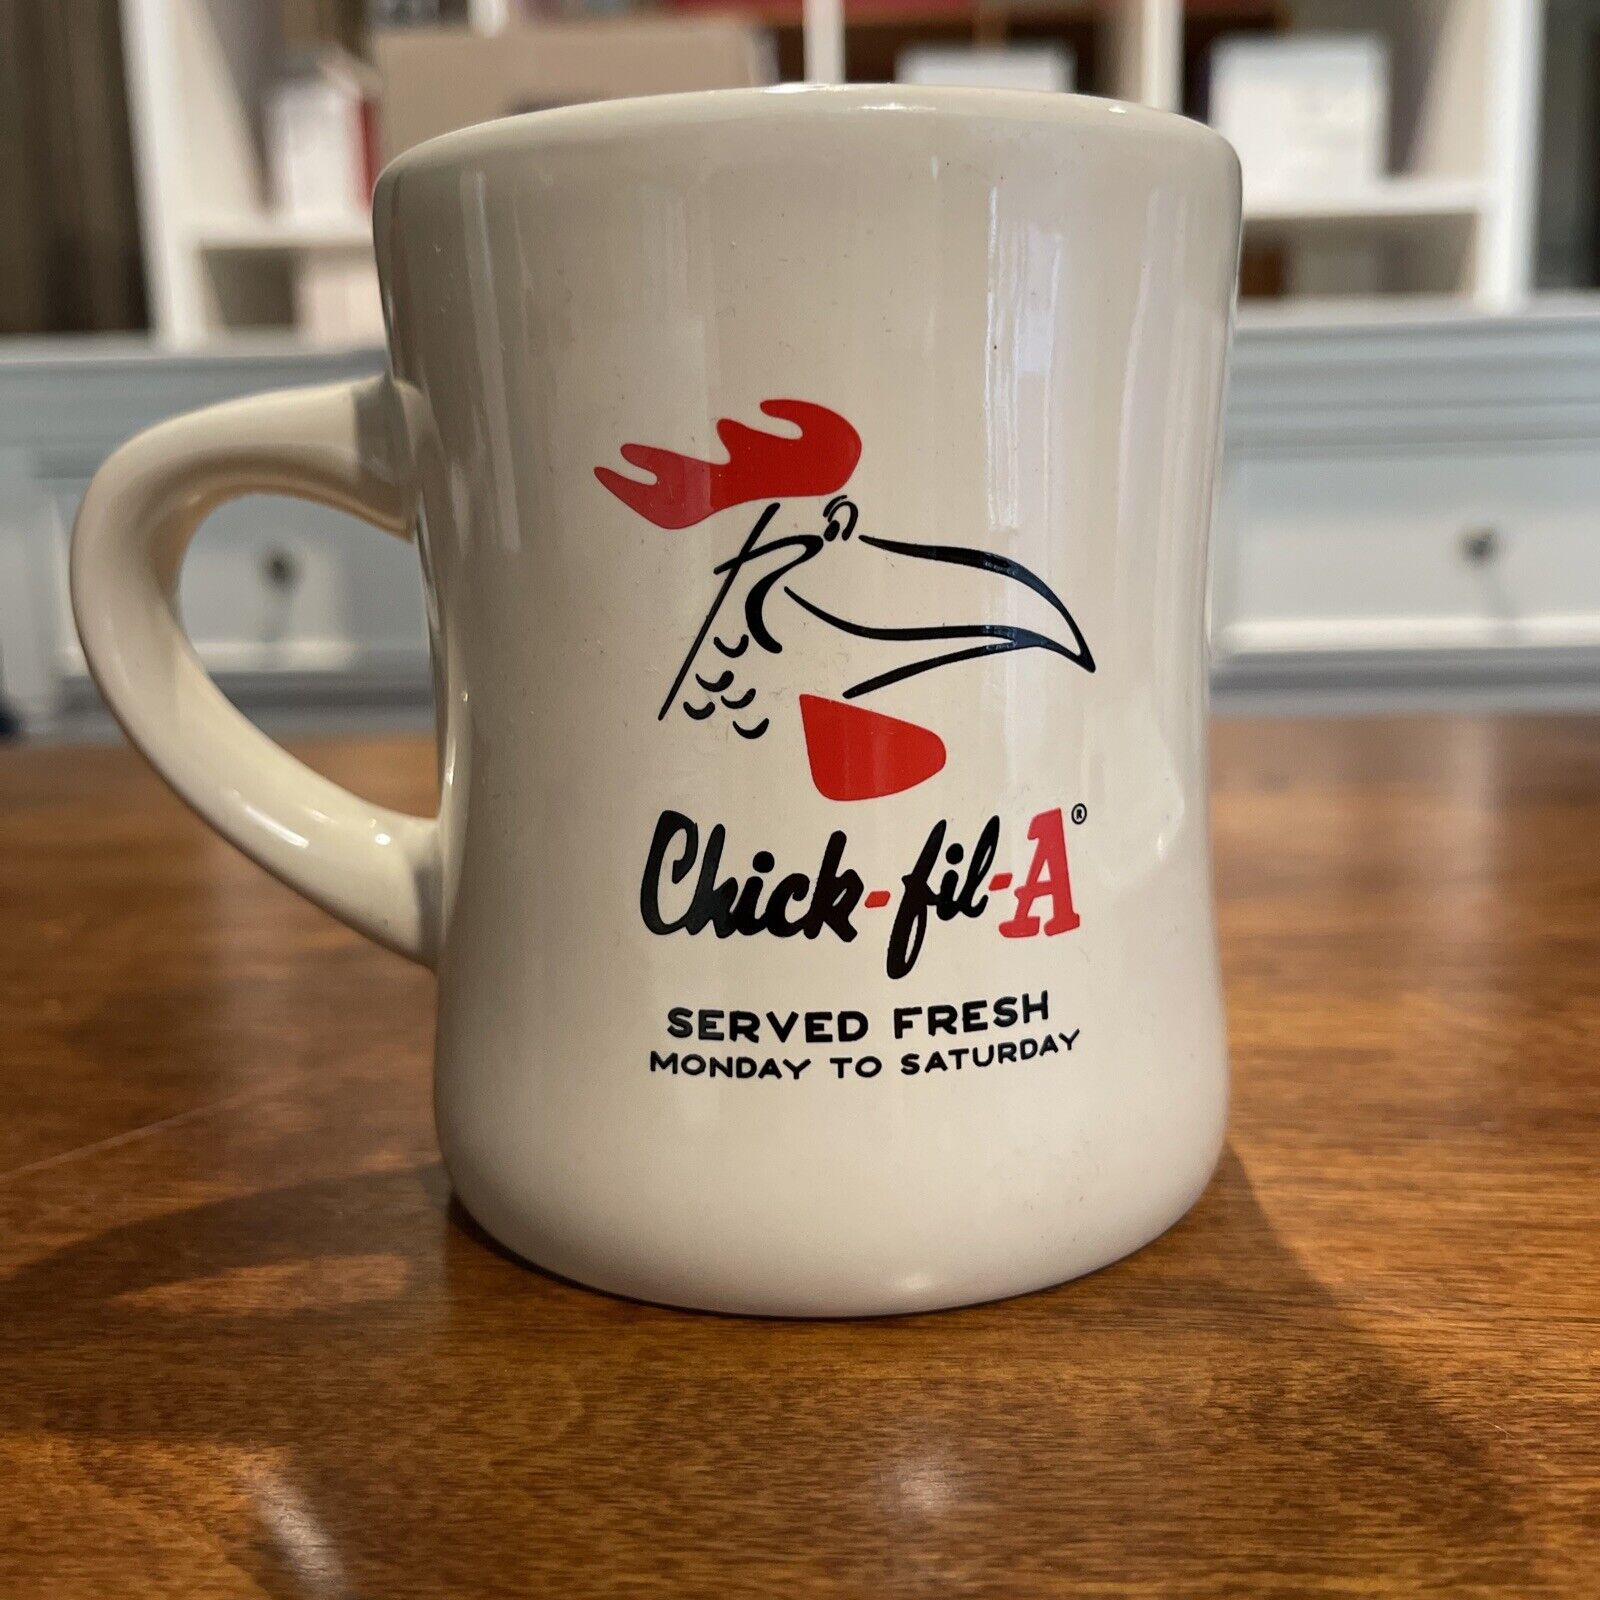 NEW 1964 Logo Chick Fil A Doodles Coffee Mug Heritage Collection Retro Diner Cup